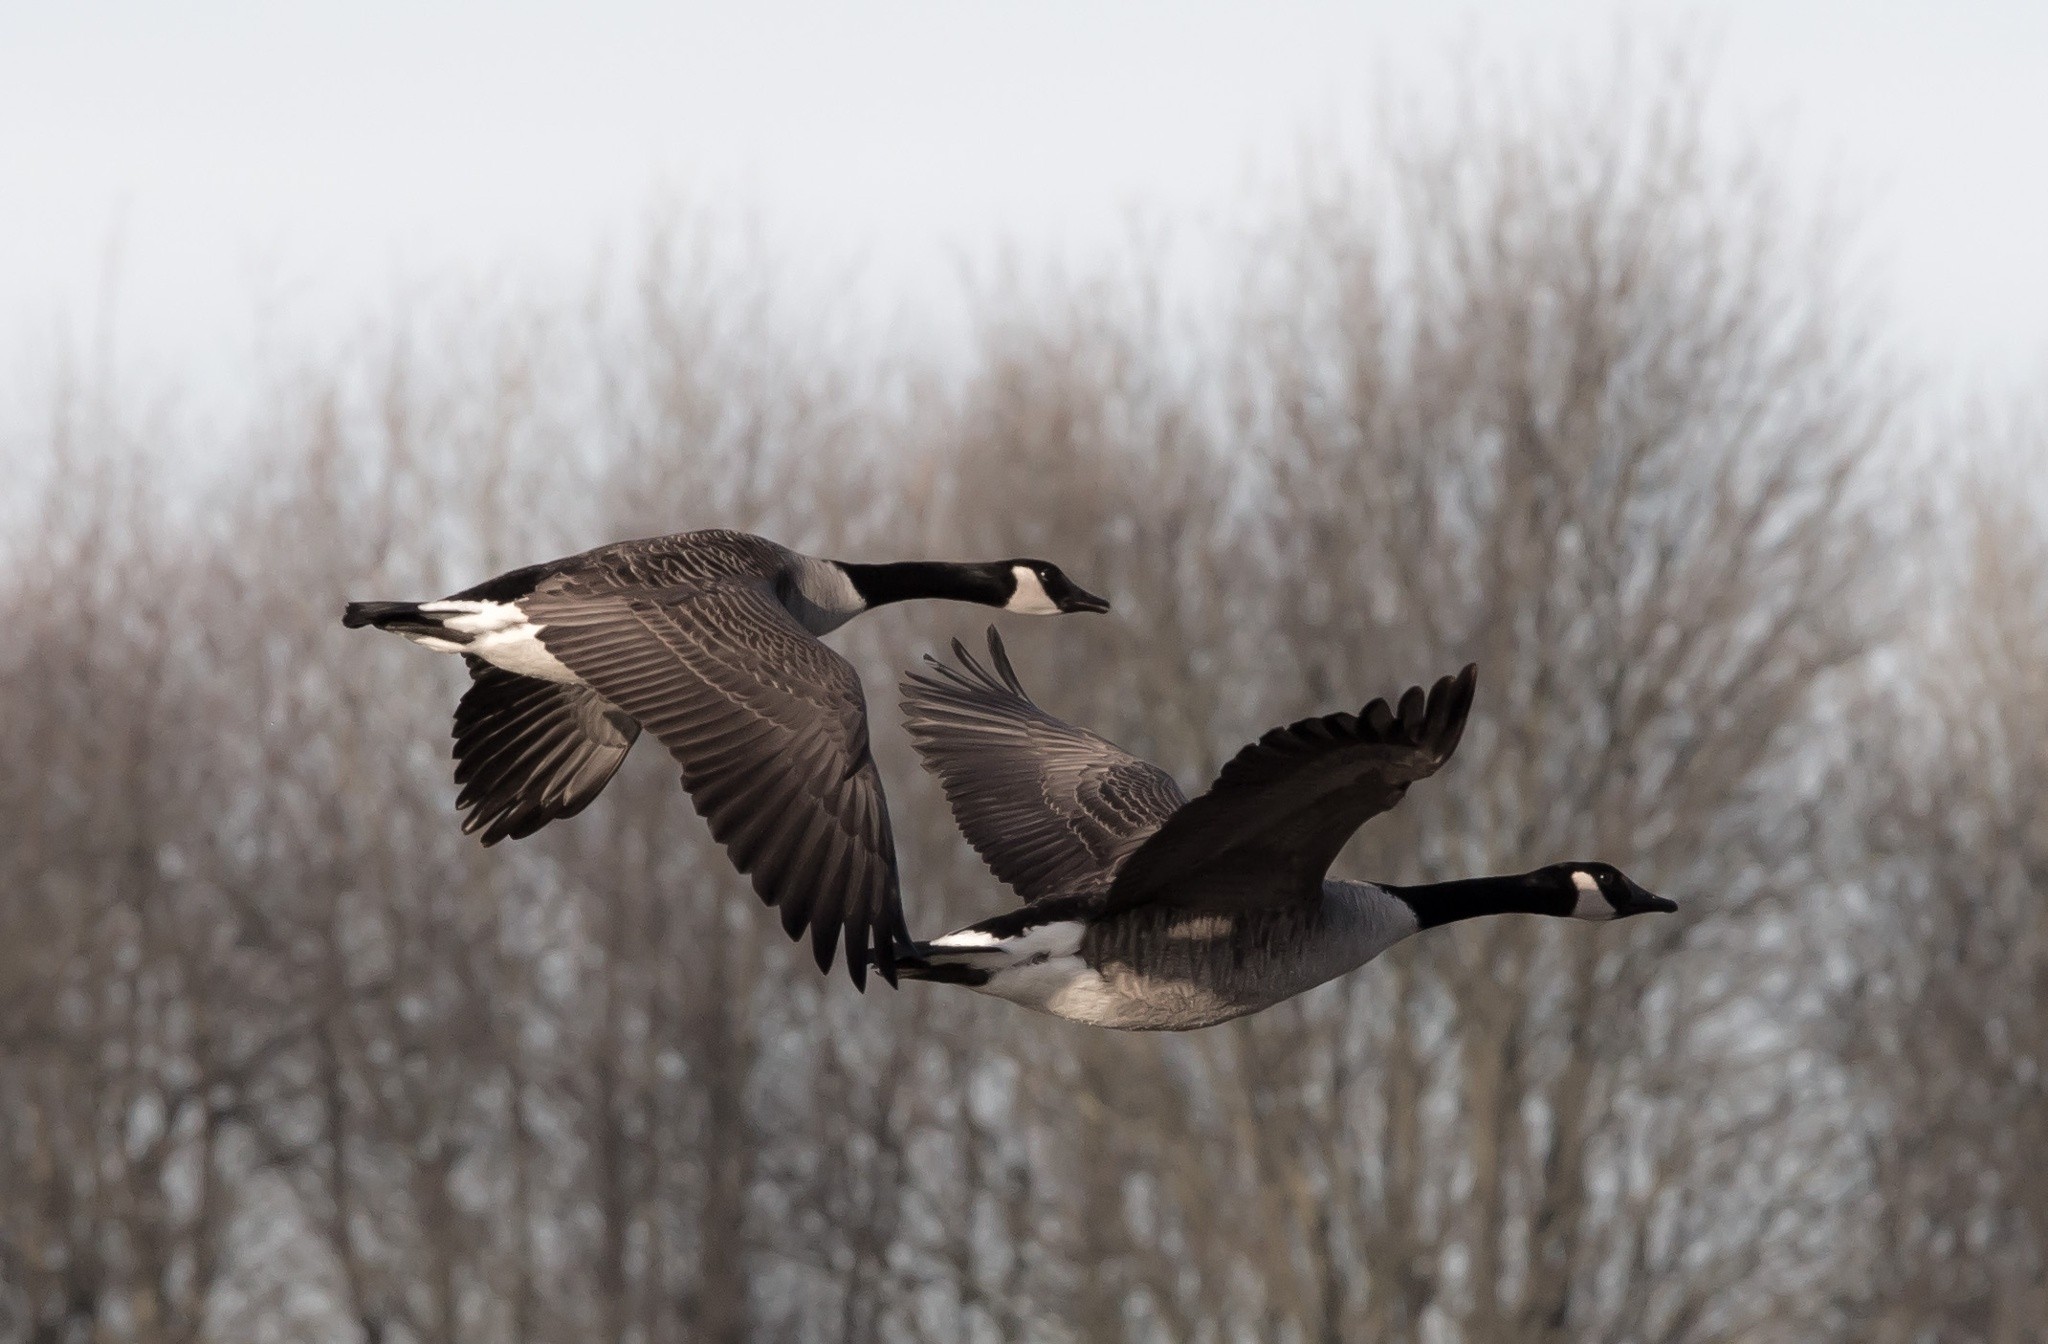 General 2048x1344 geese animals flying birds